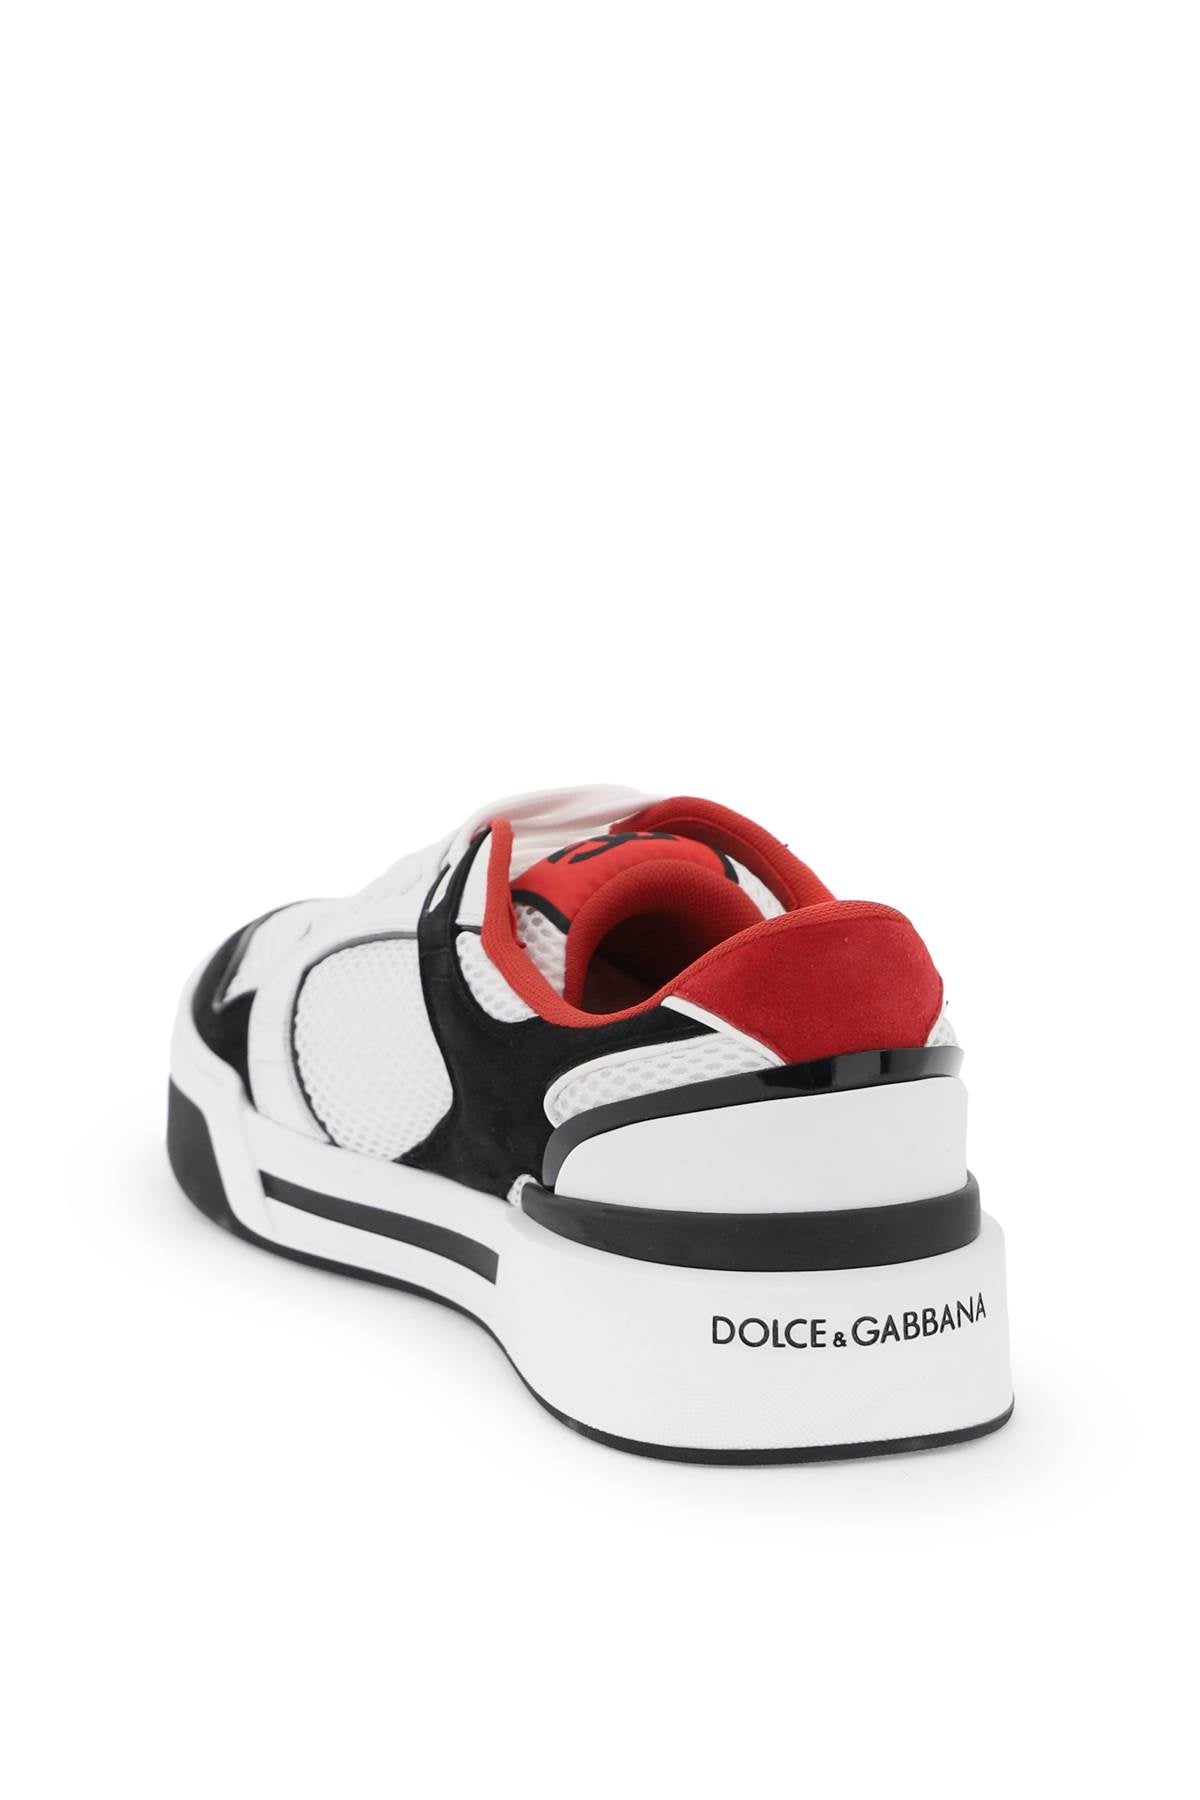 Dolce & gabbana new roma sneakers-2